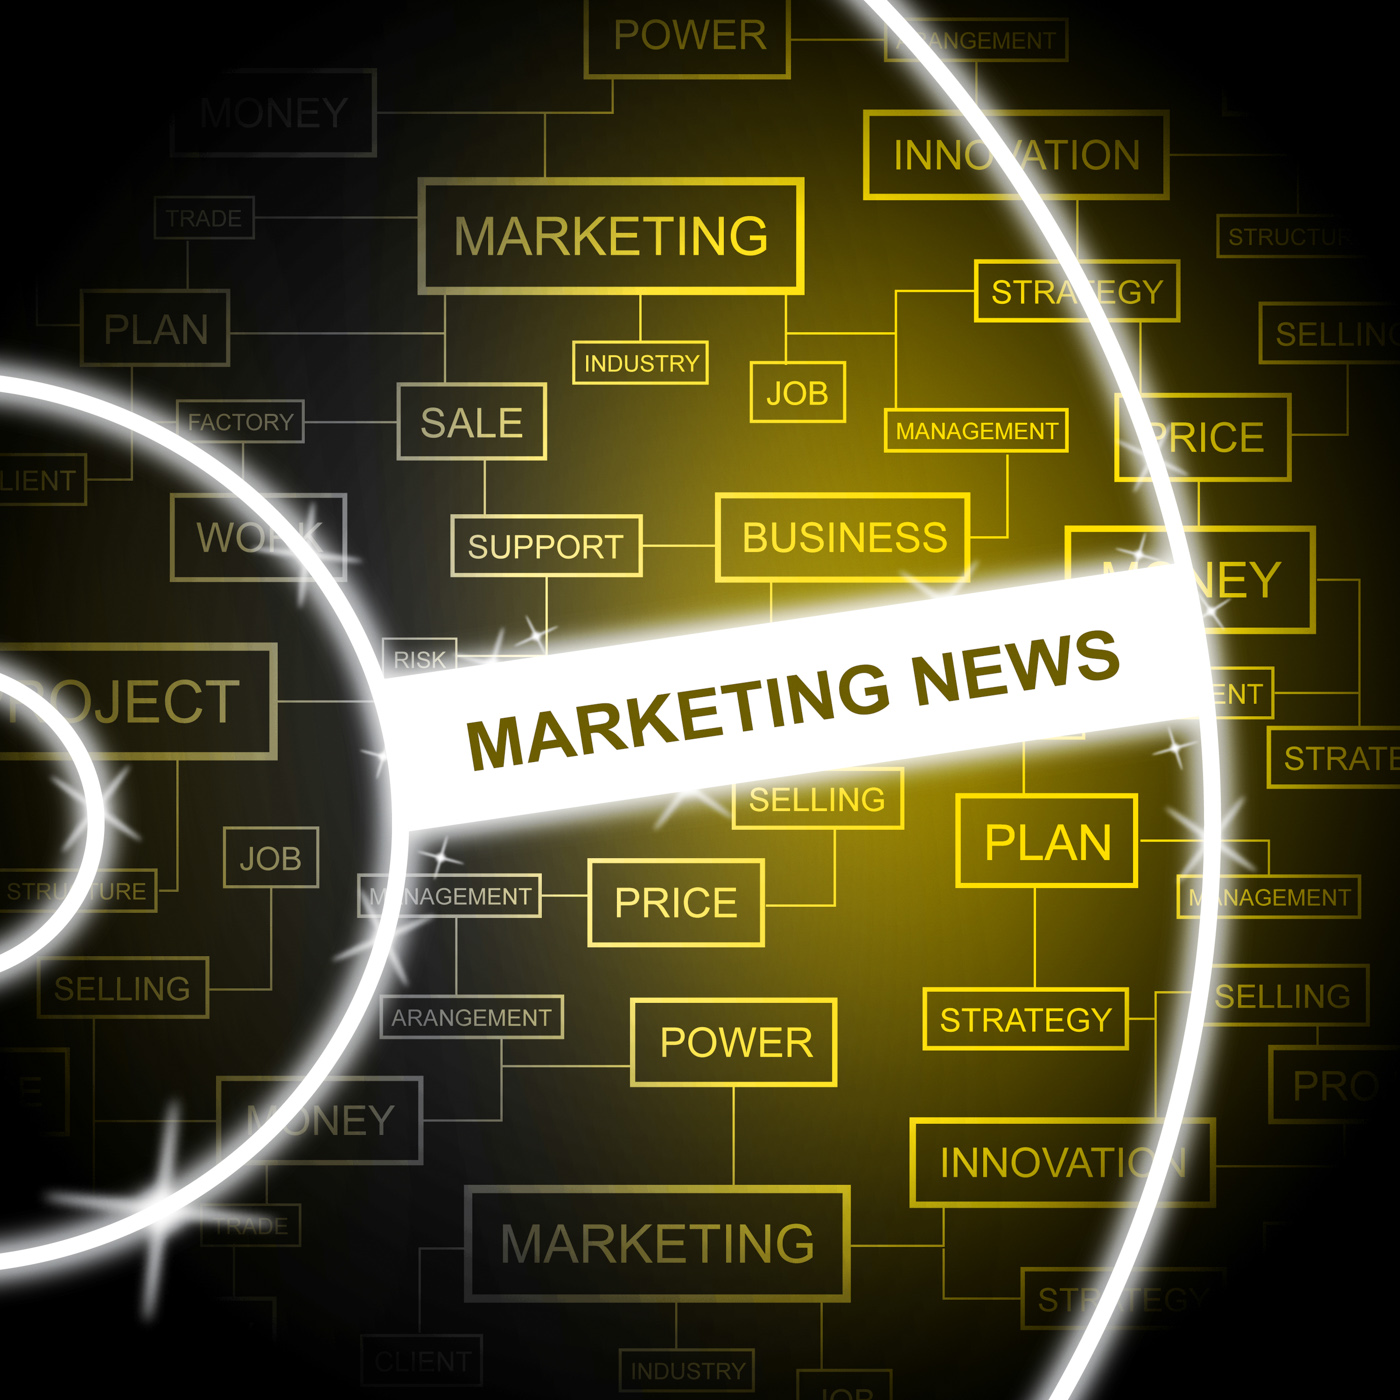 Marketing news indicates email lists and article photo